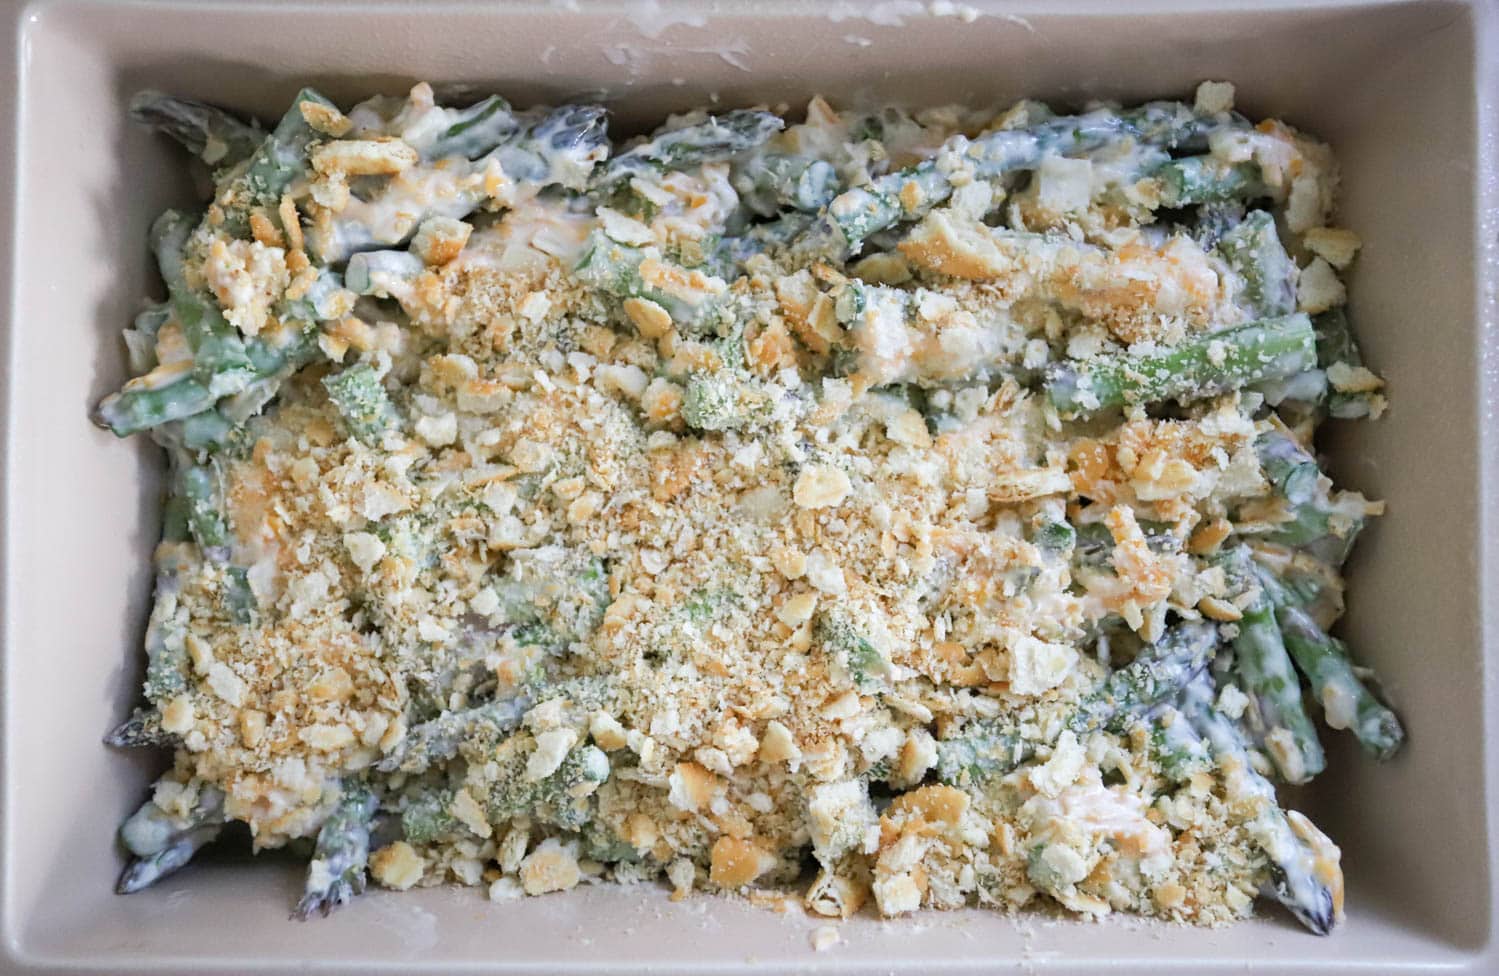 asparagus casserole uncooked in baking dish.